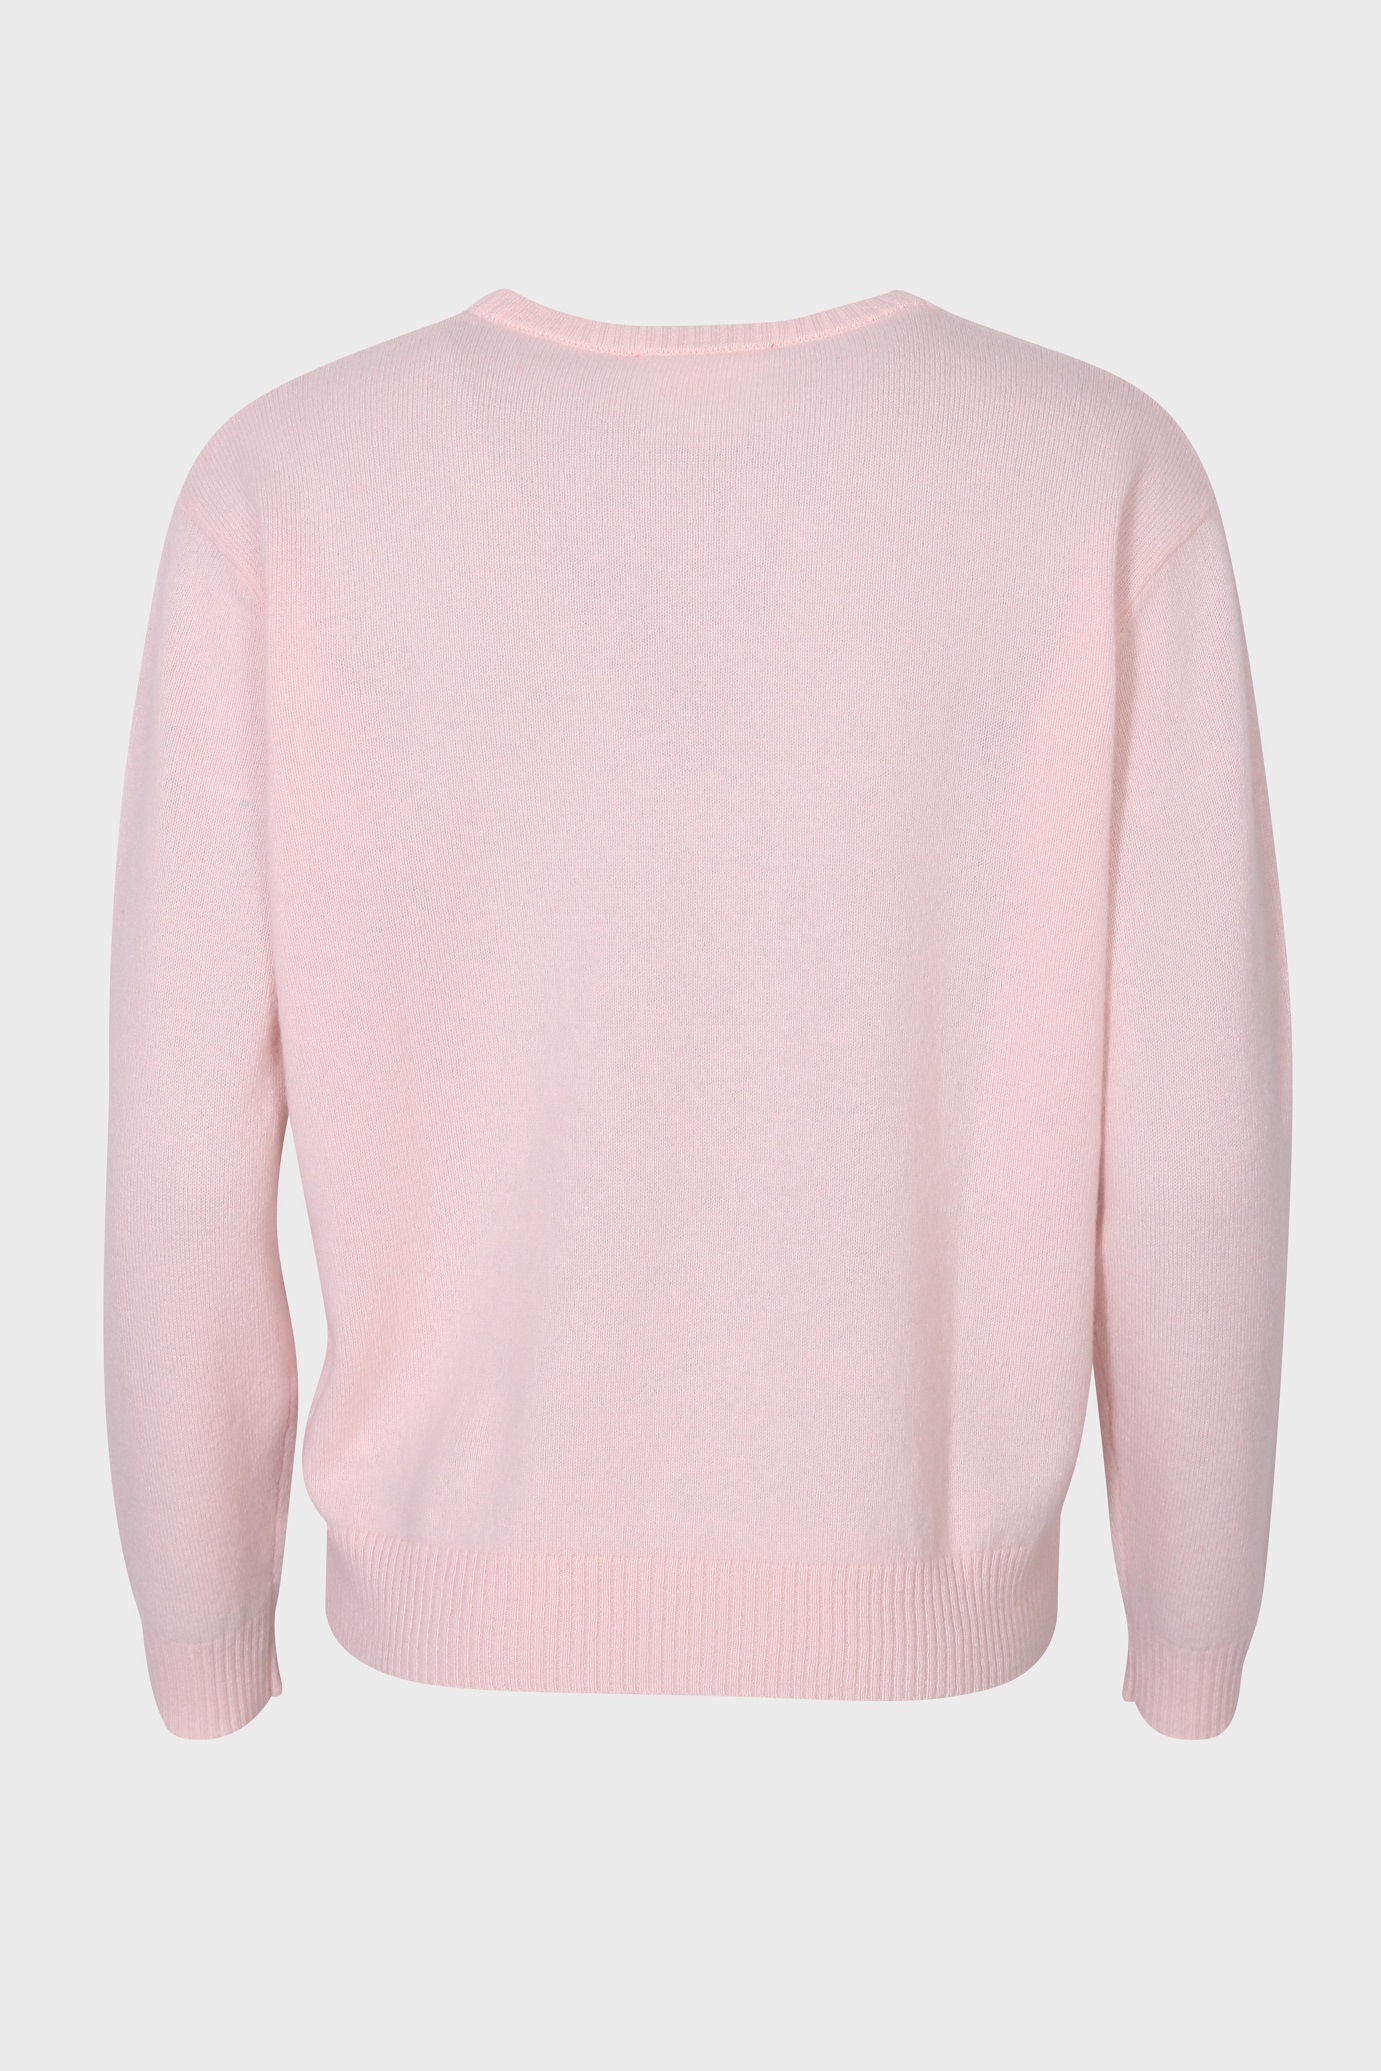 ABSOLUT CASHMERE Sweater Ysee Ice Cream L